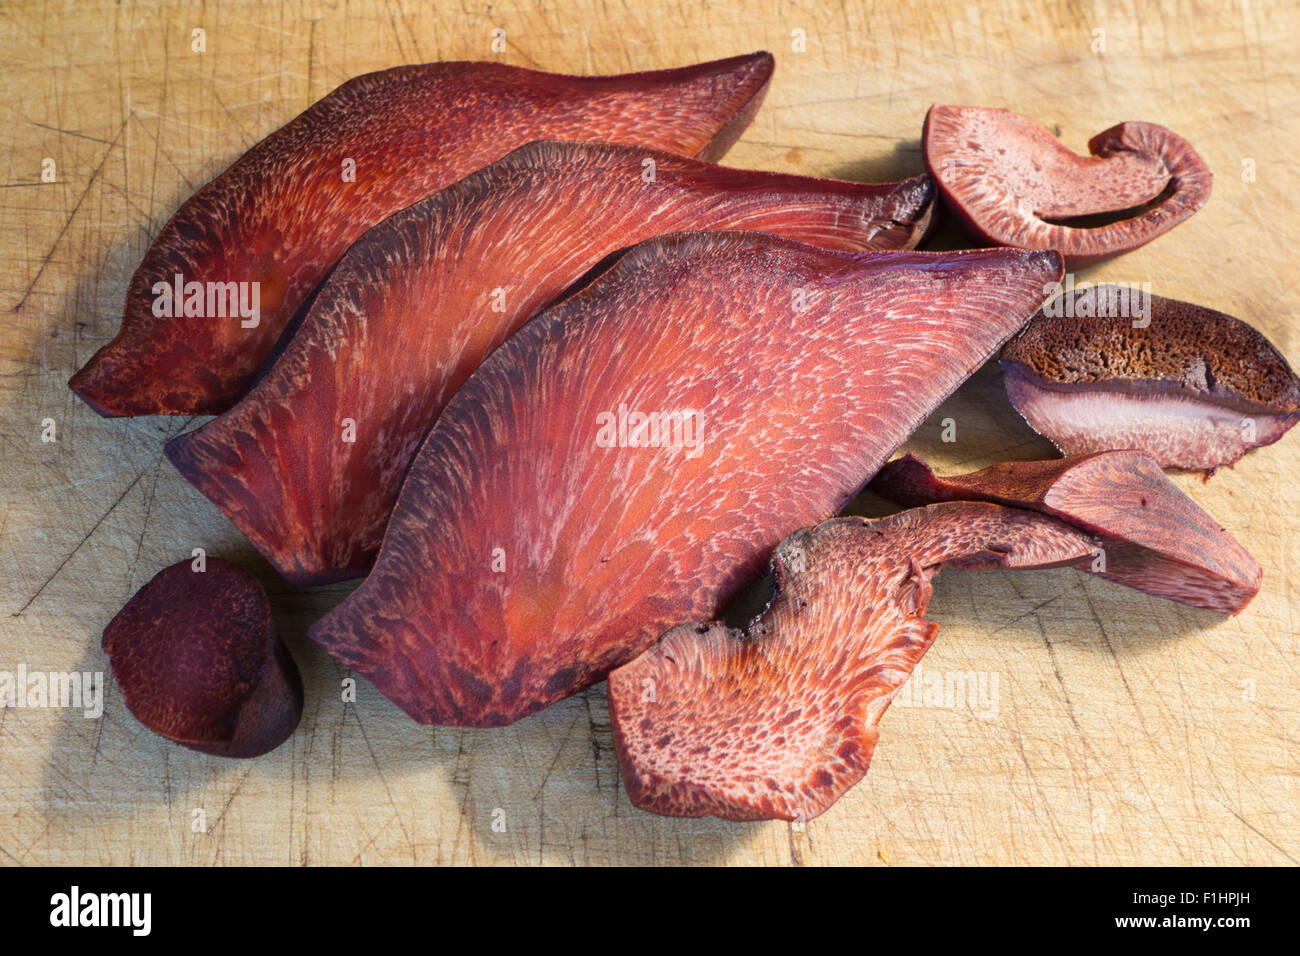 Section by fungus liver Fistula Needles or Beefsteak fungus also known as ox tongue (Fistulina hepatica) Stock Photo